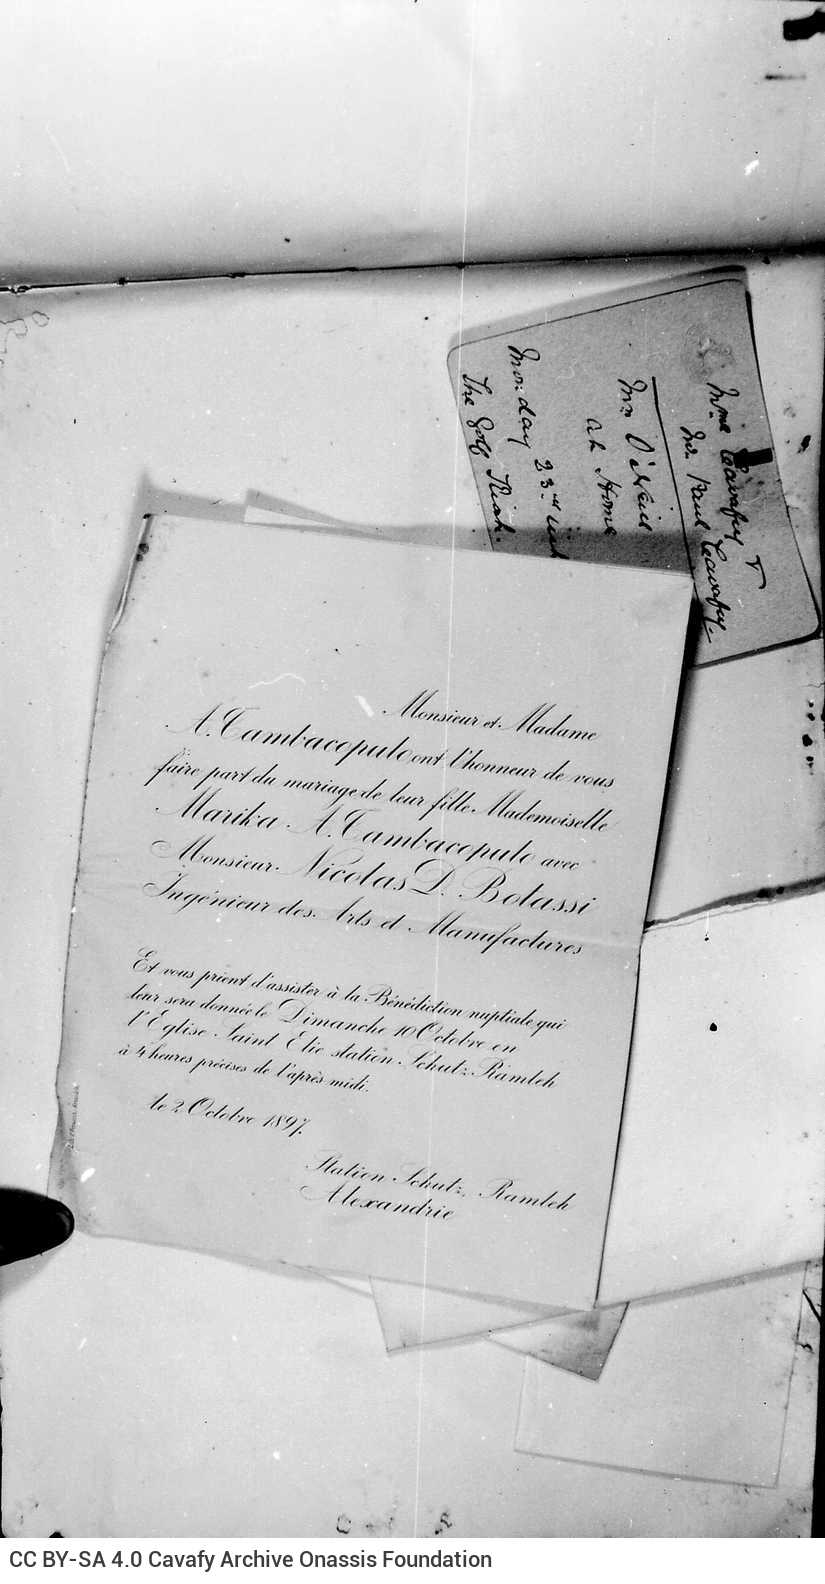 Personal scrapbook with many sheets, on which are affixed printed and handwritten invitations to Paul Cavafy and the Cavafy f